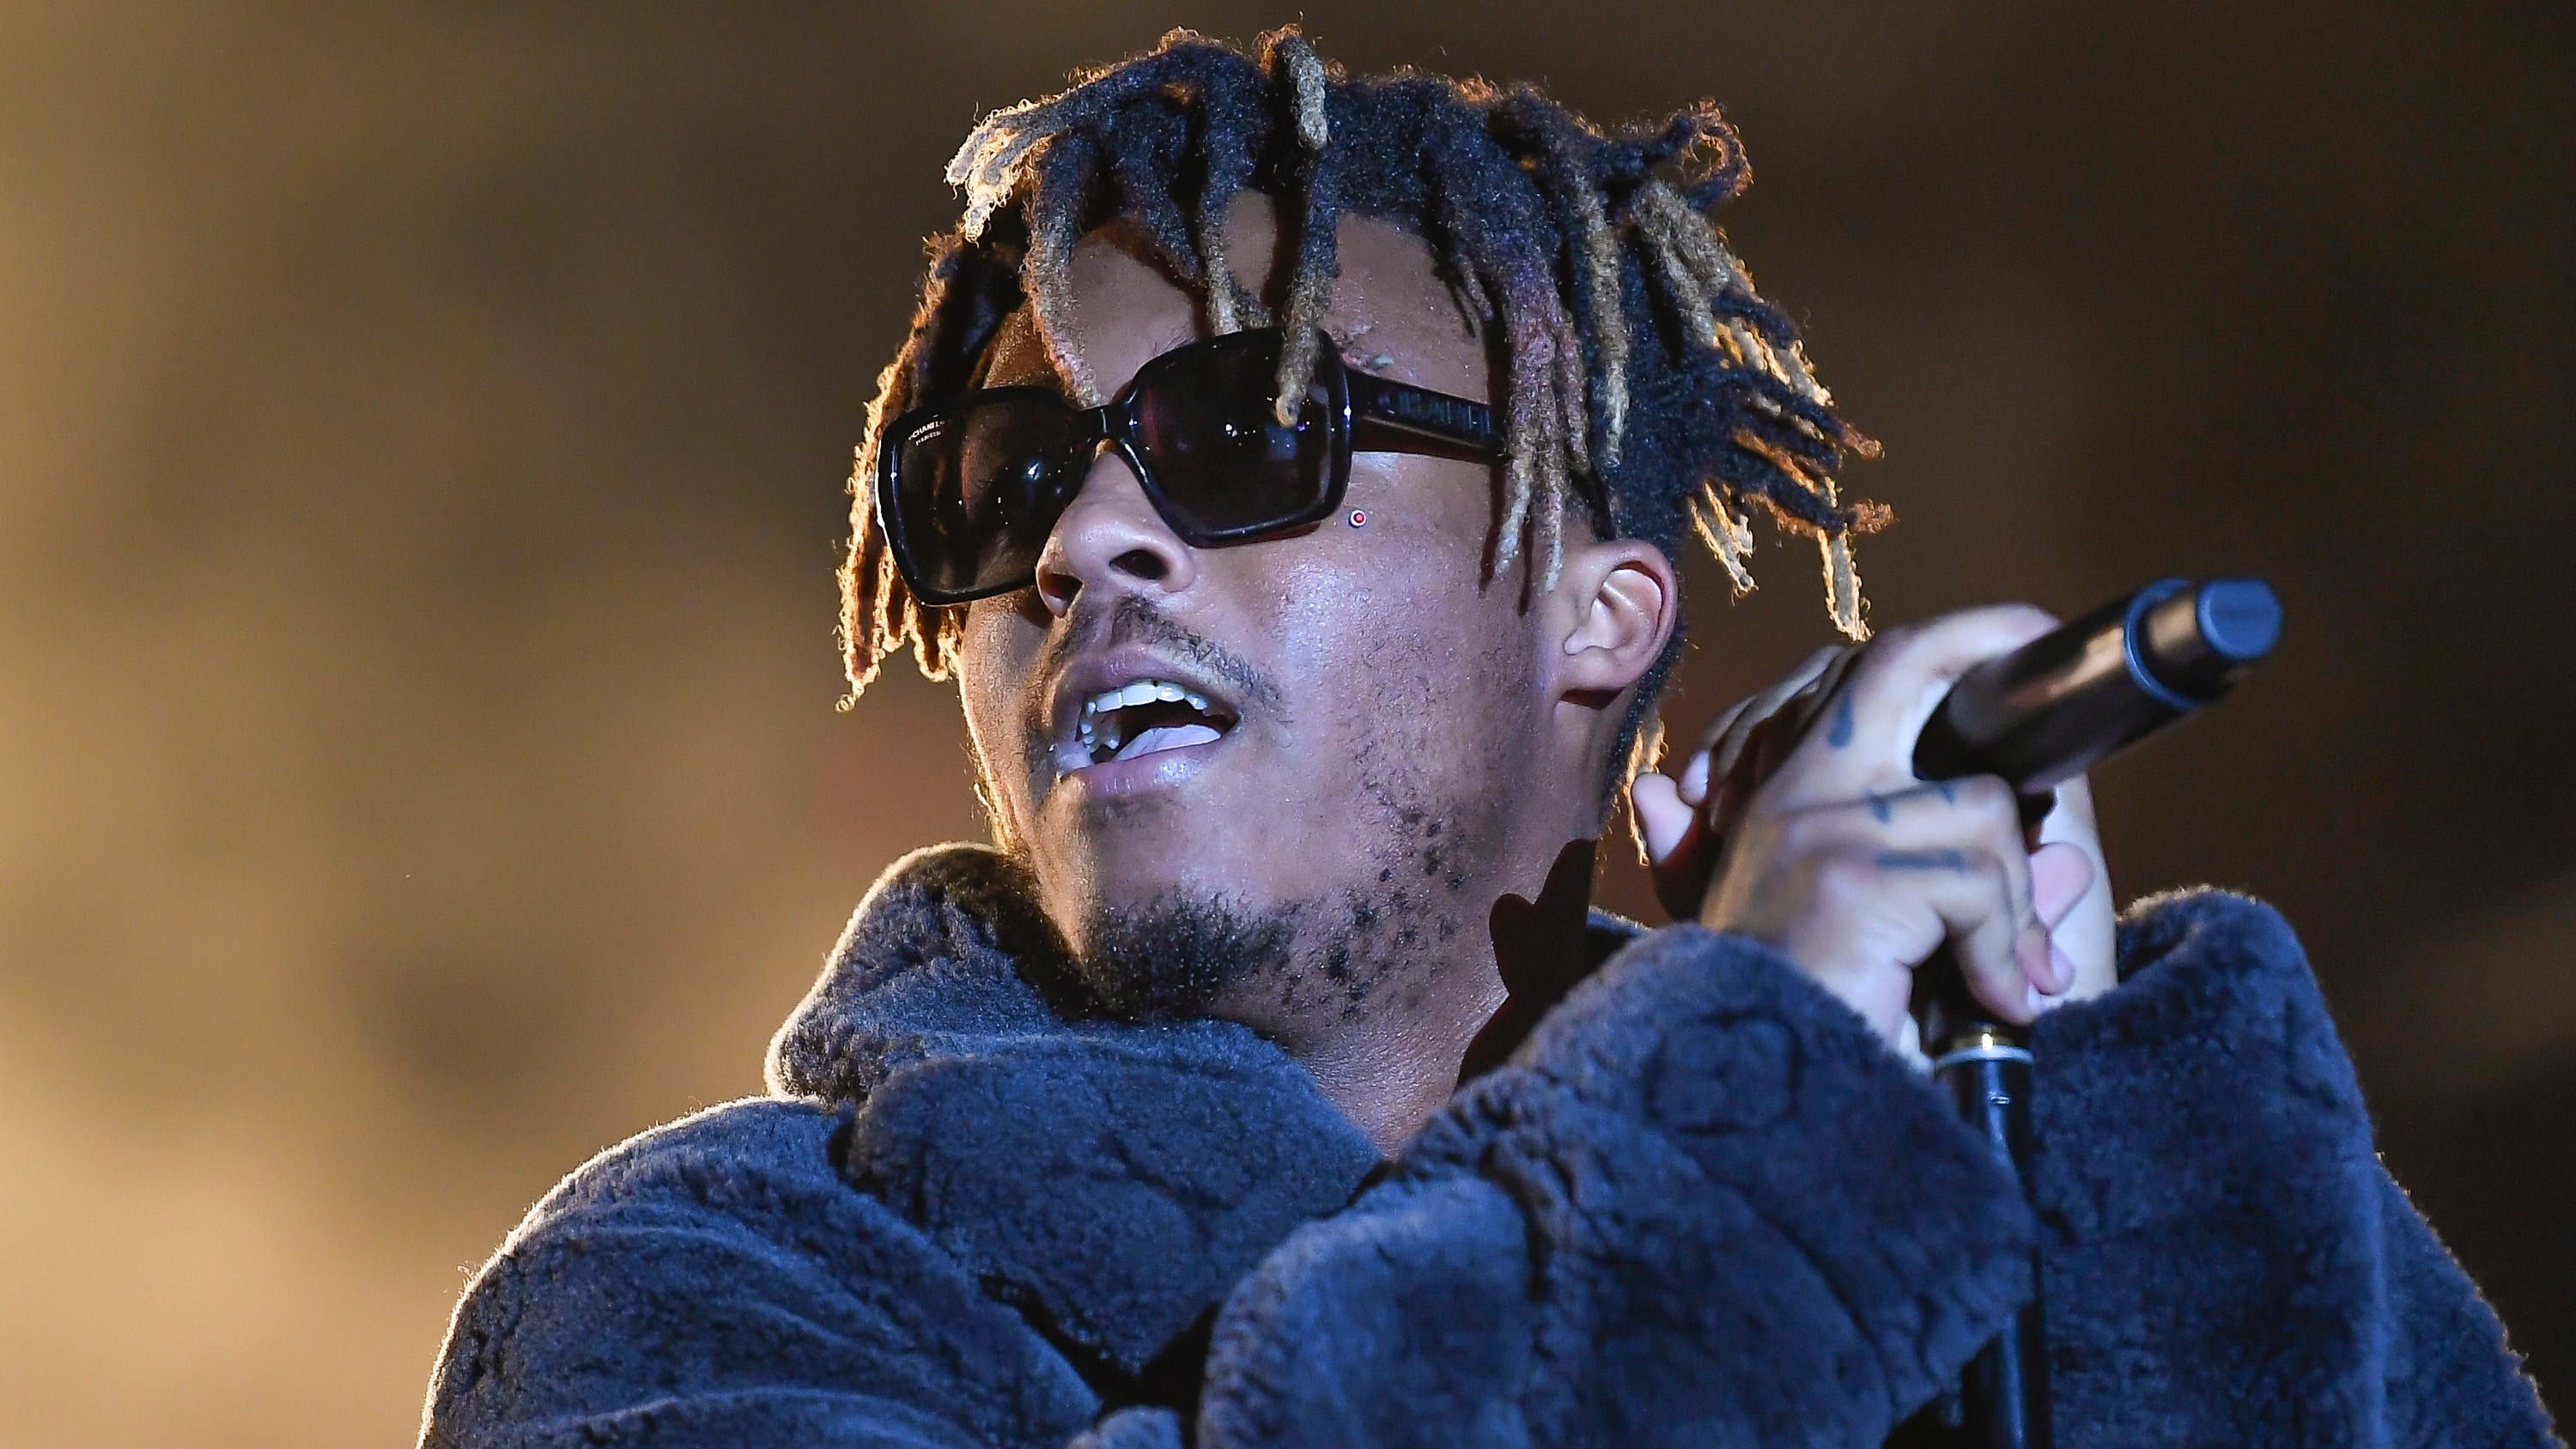 Juice WRLD died before attending 21st birthday party, after rapping